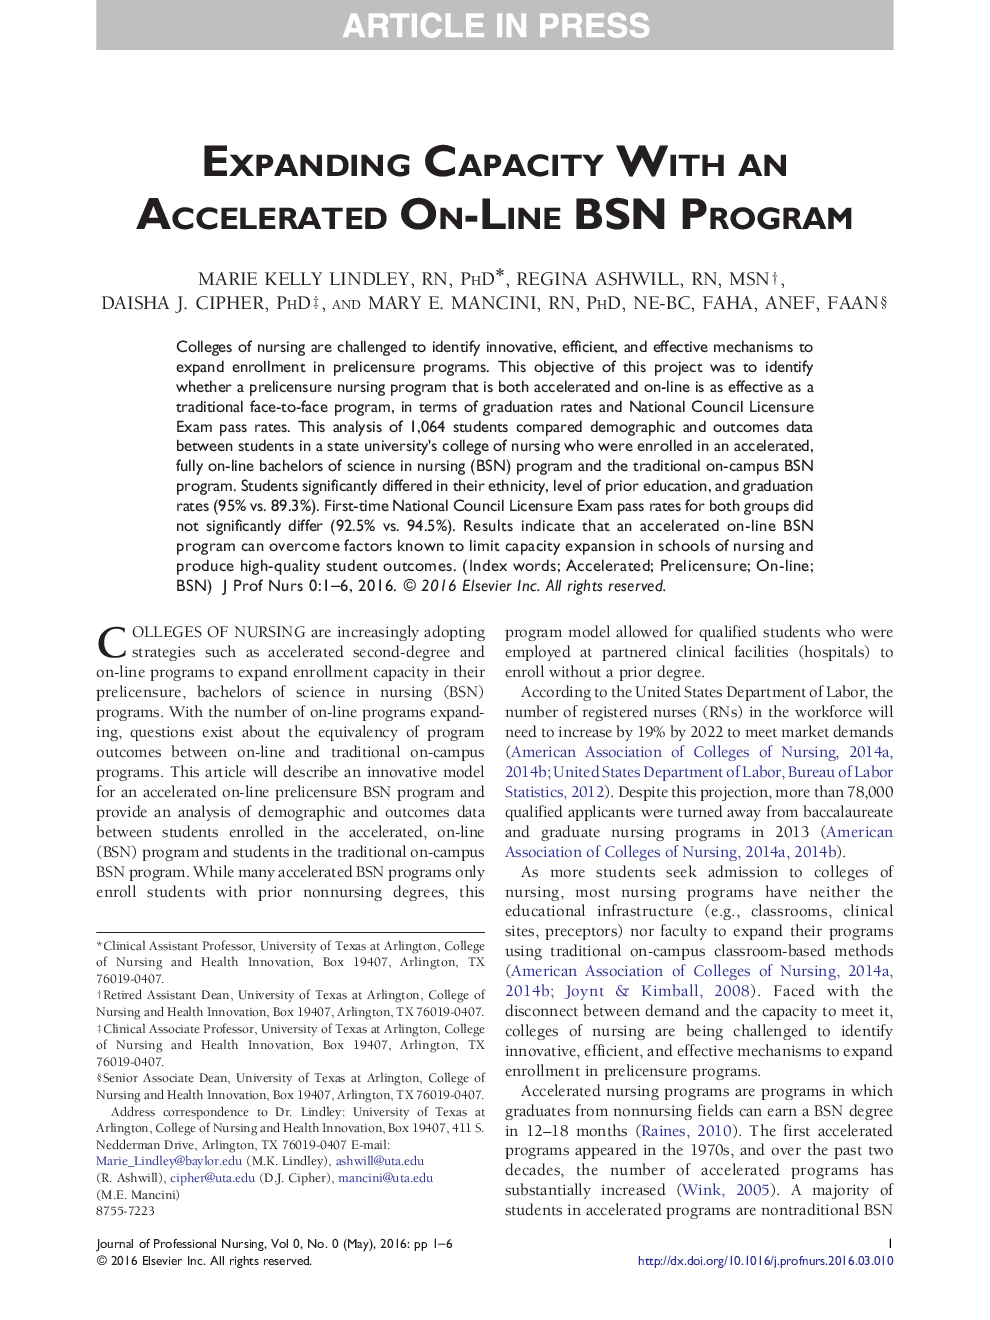 Expanding Capacity With an Accelerated On-Line BSN Program